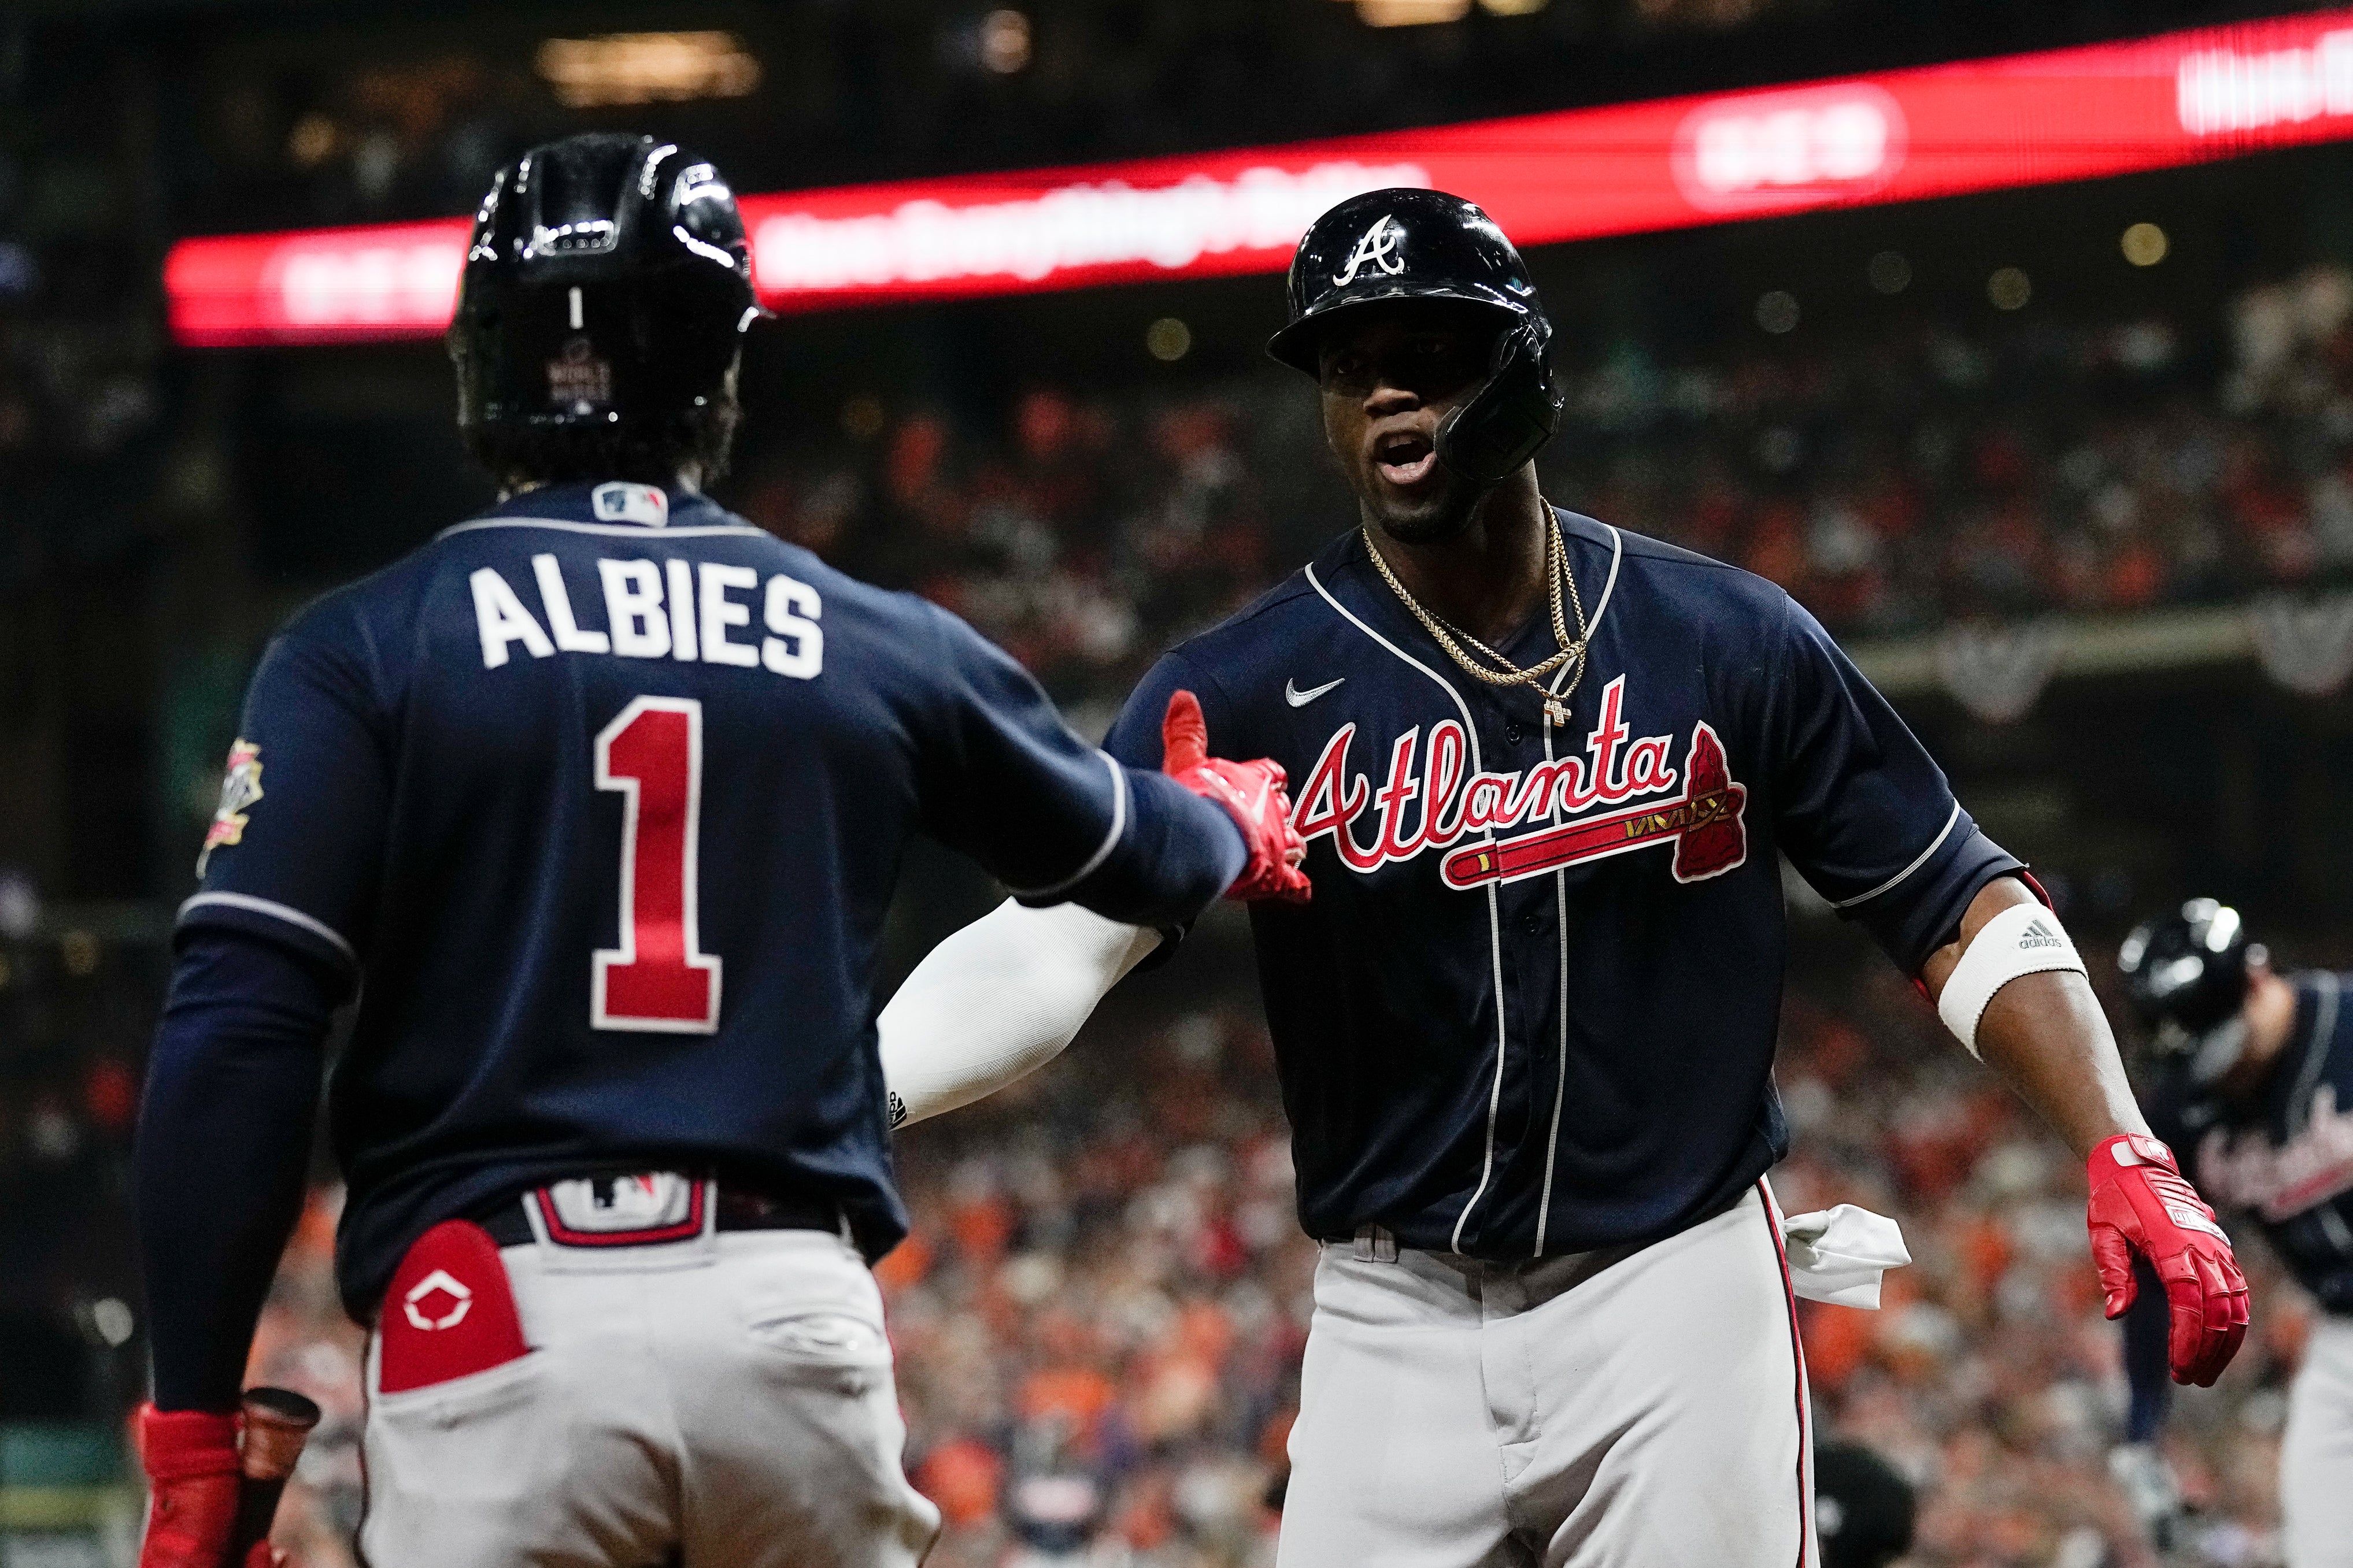 How Atlanta Became the Home of the Braves